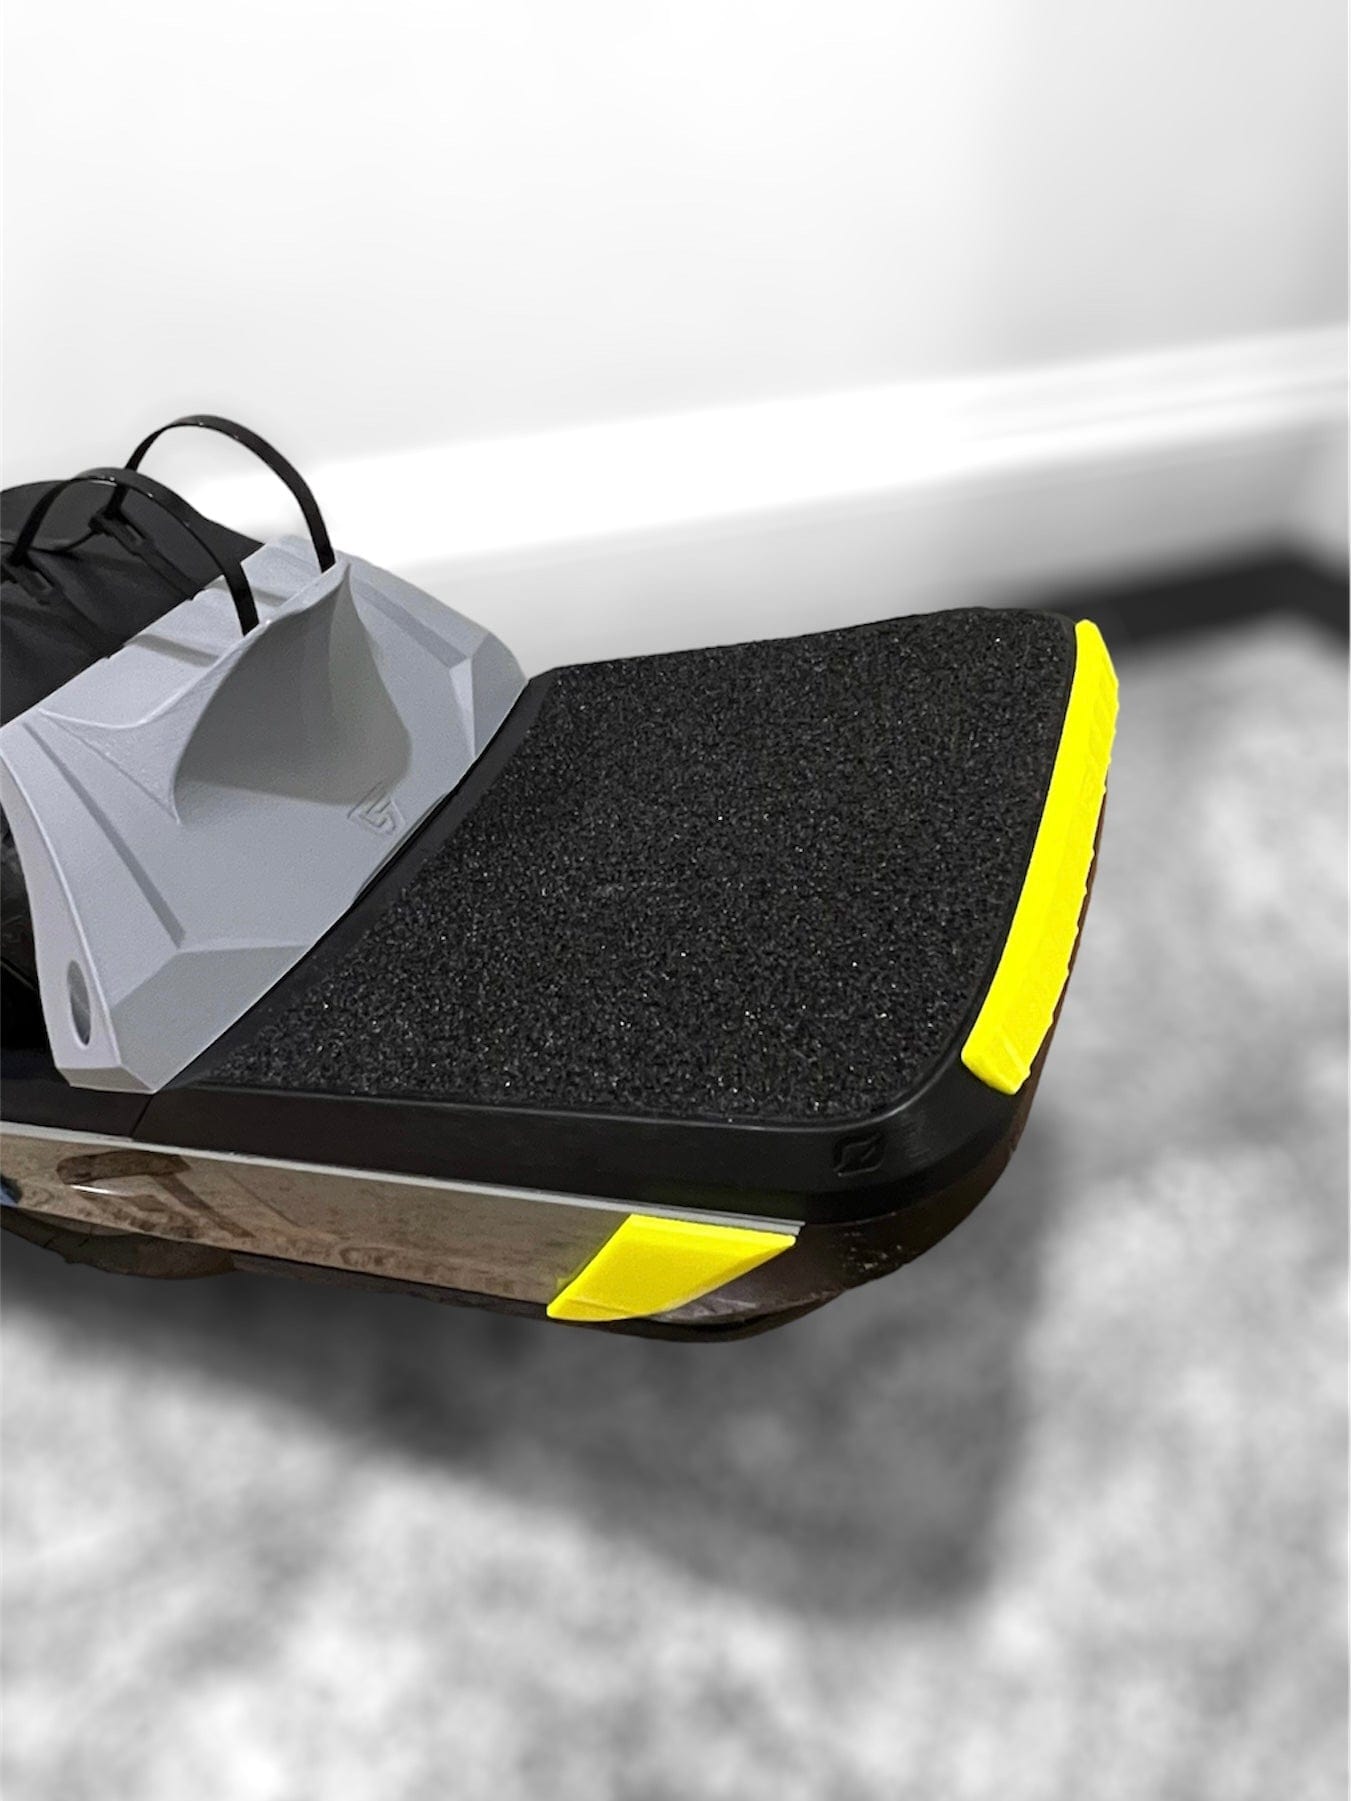 Noseguard for Onewheel GT | Footpad Sensor Protection